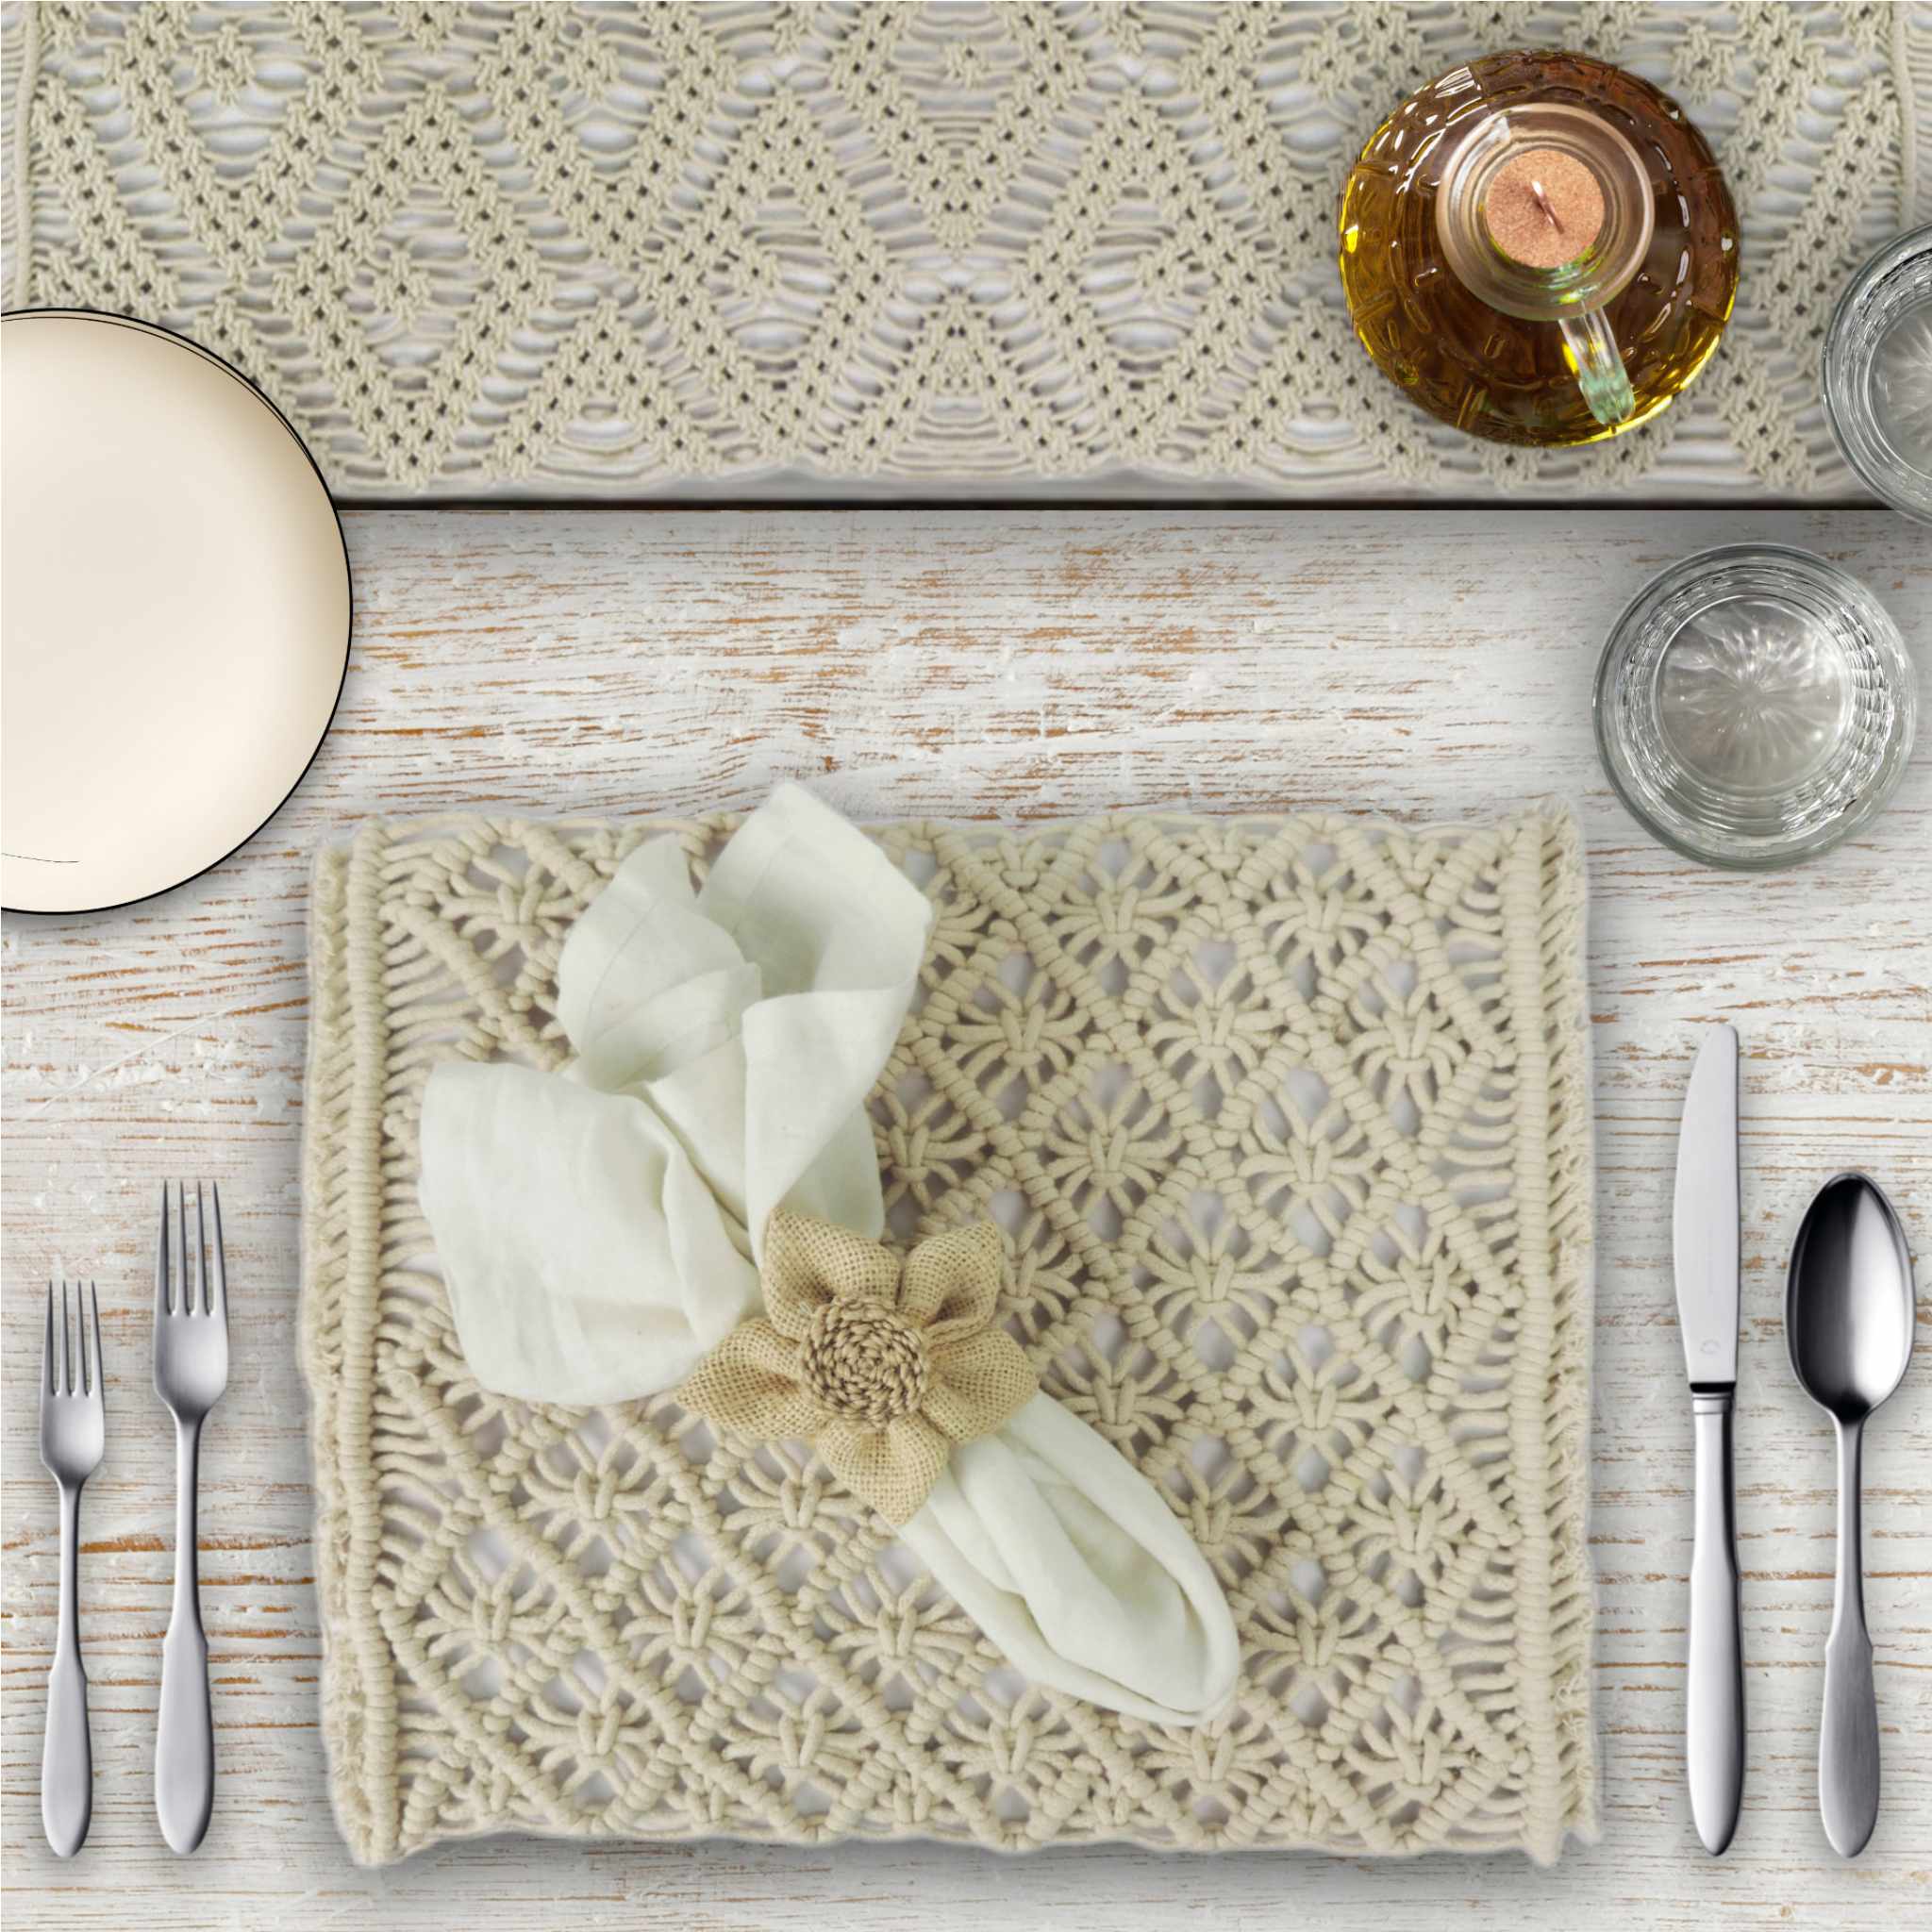 Macramé Table Setting for 4 - Placemats, Napkin Rings & Table Runner in White